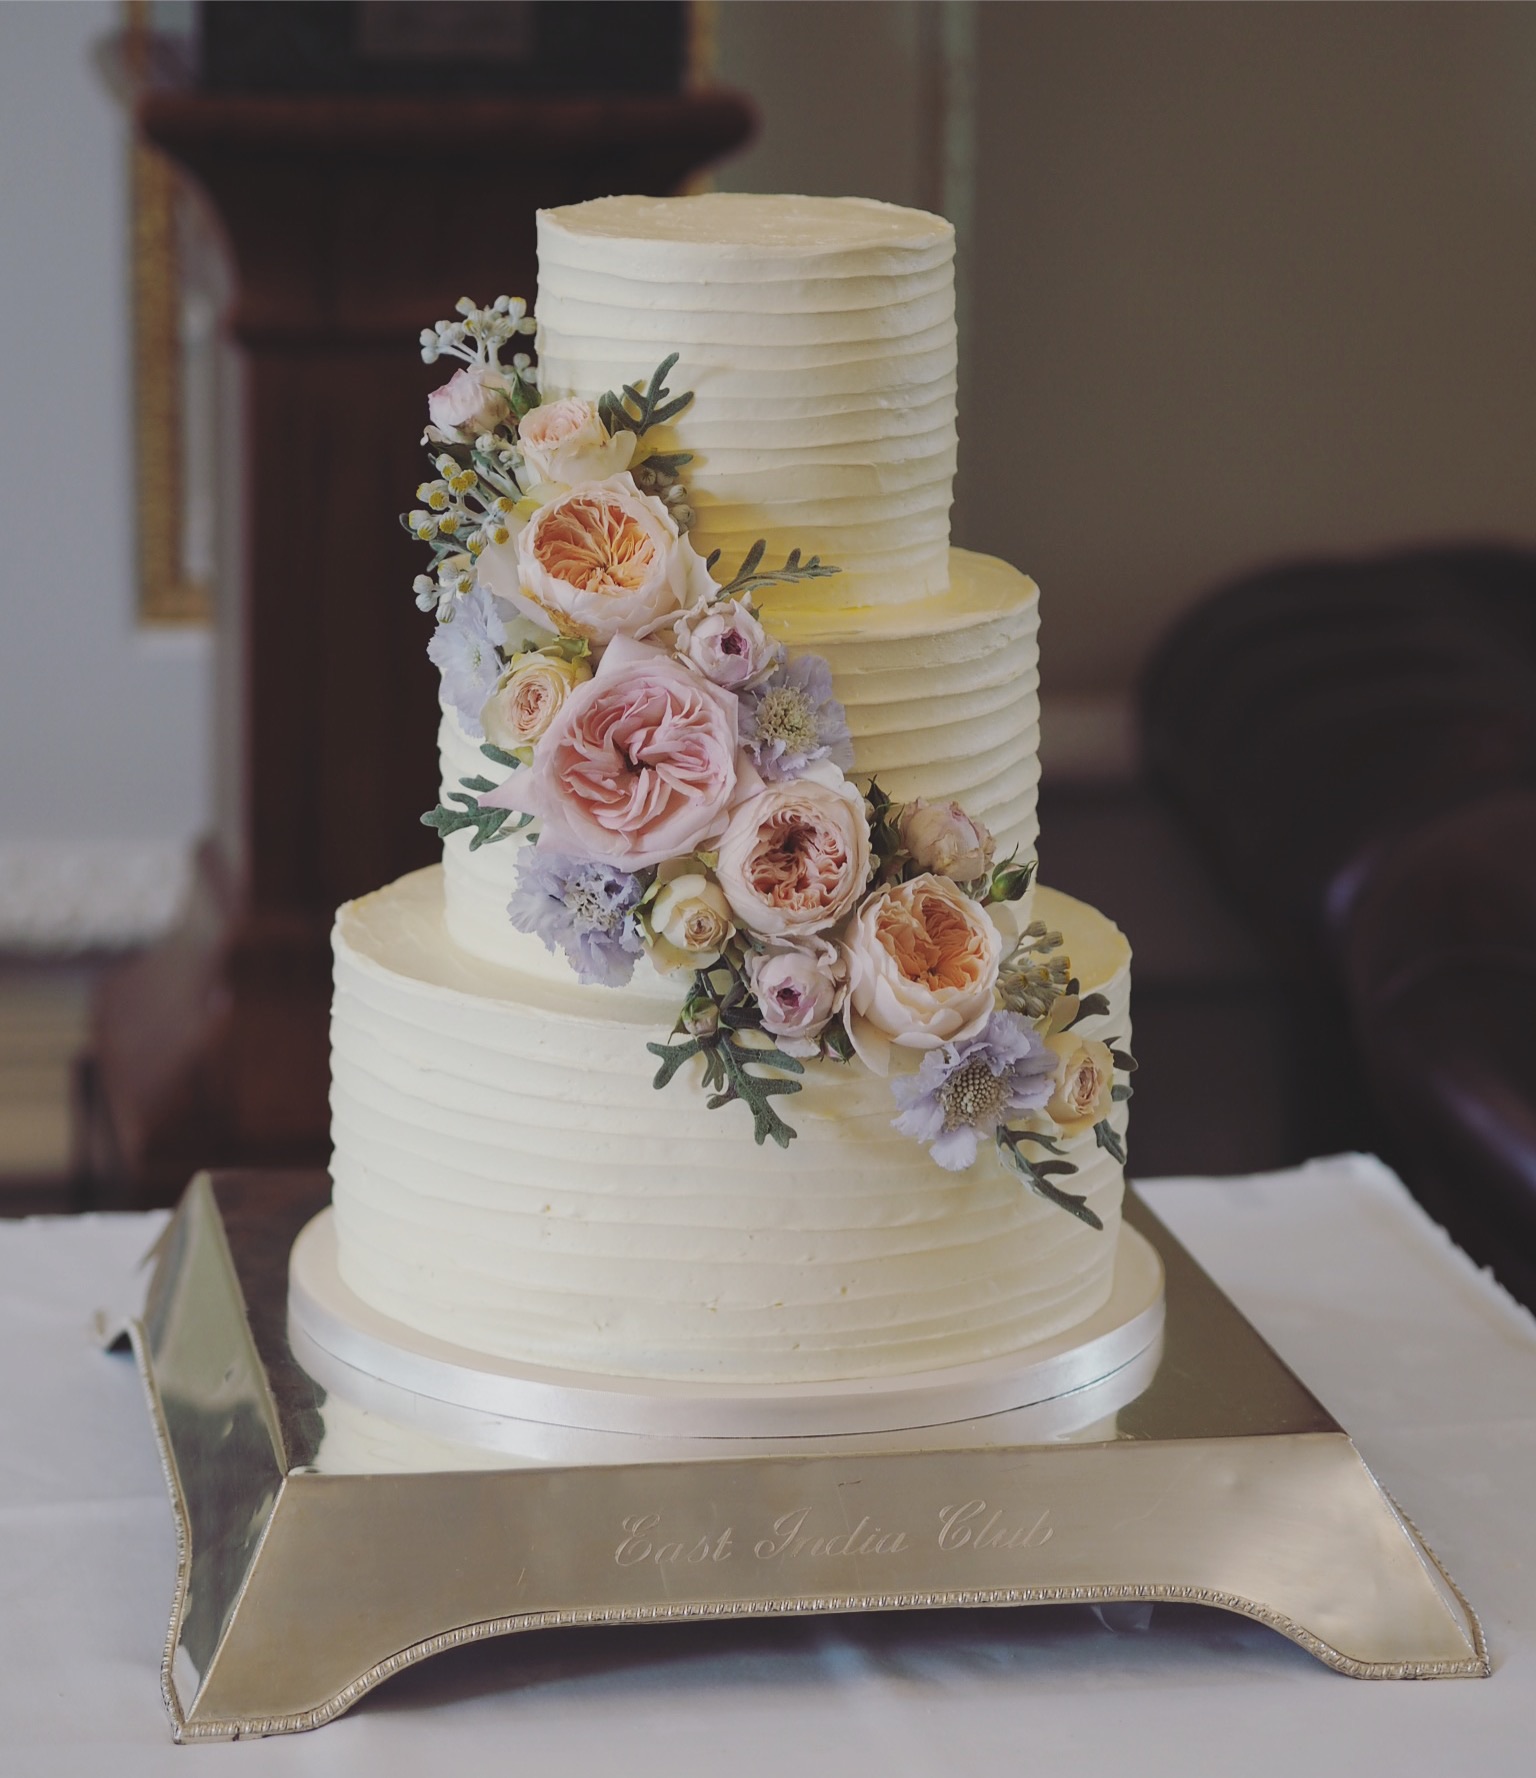 a 3 tier ribbed buttercream wedding cake with a cascade of fresh flowers, juliette david austin roses, scabious and foliage at The East India Club London